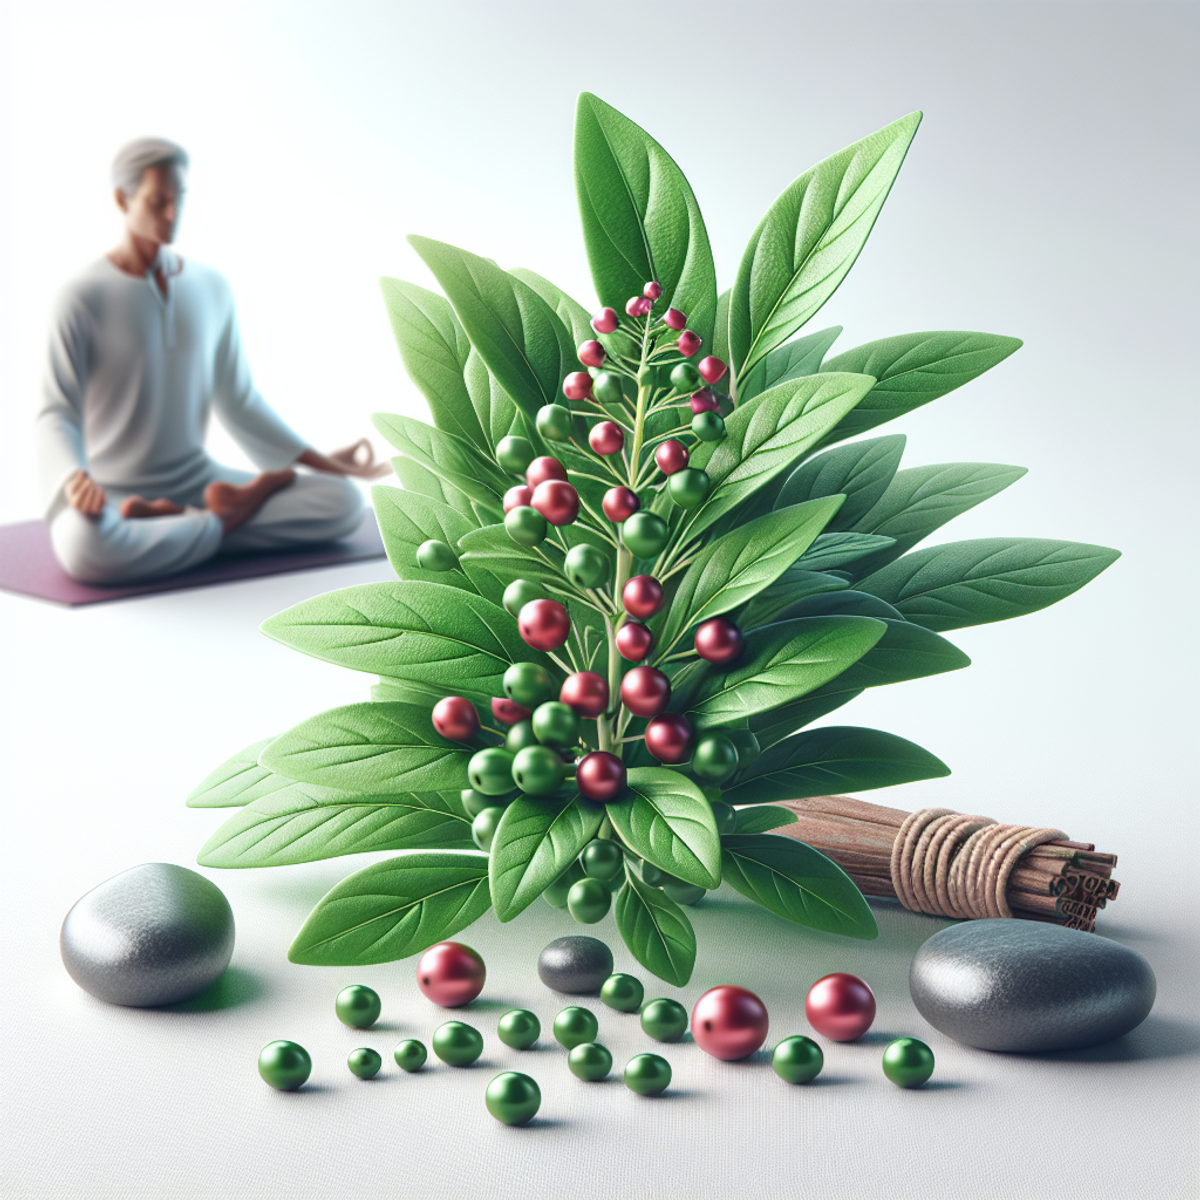 A person sitting cross-legged on a yoga mat next to an Ashwagandha plant with bright green leaves and dark red berries.